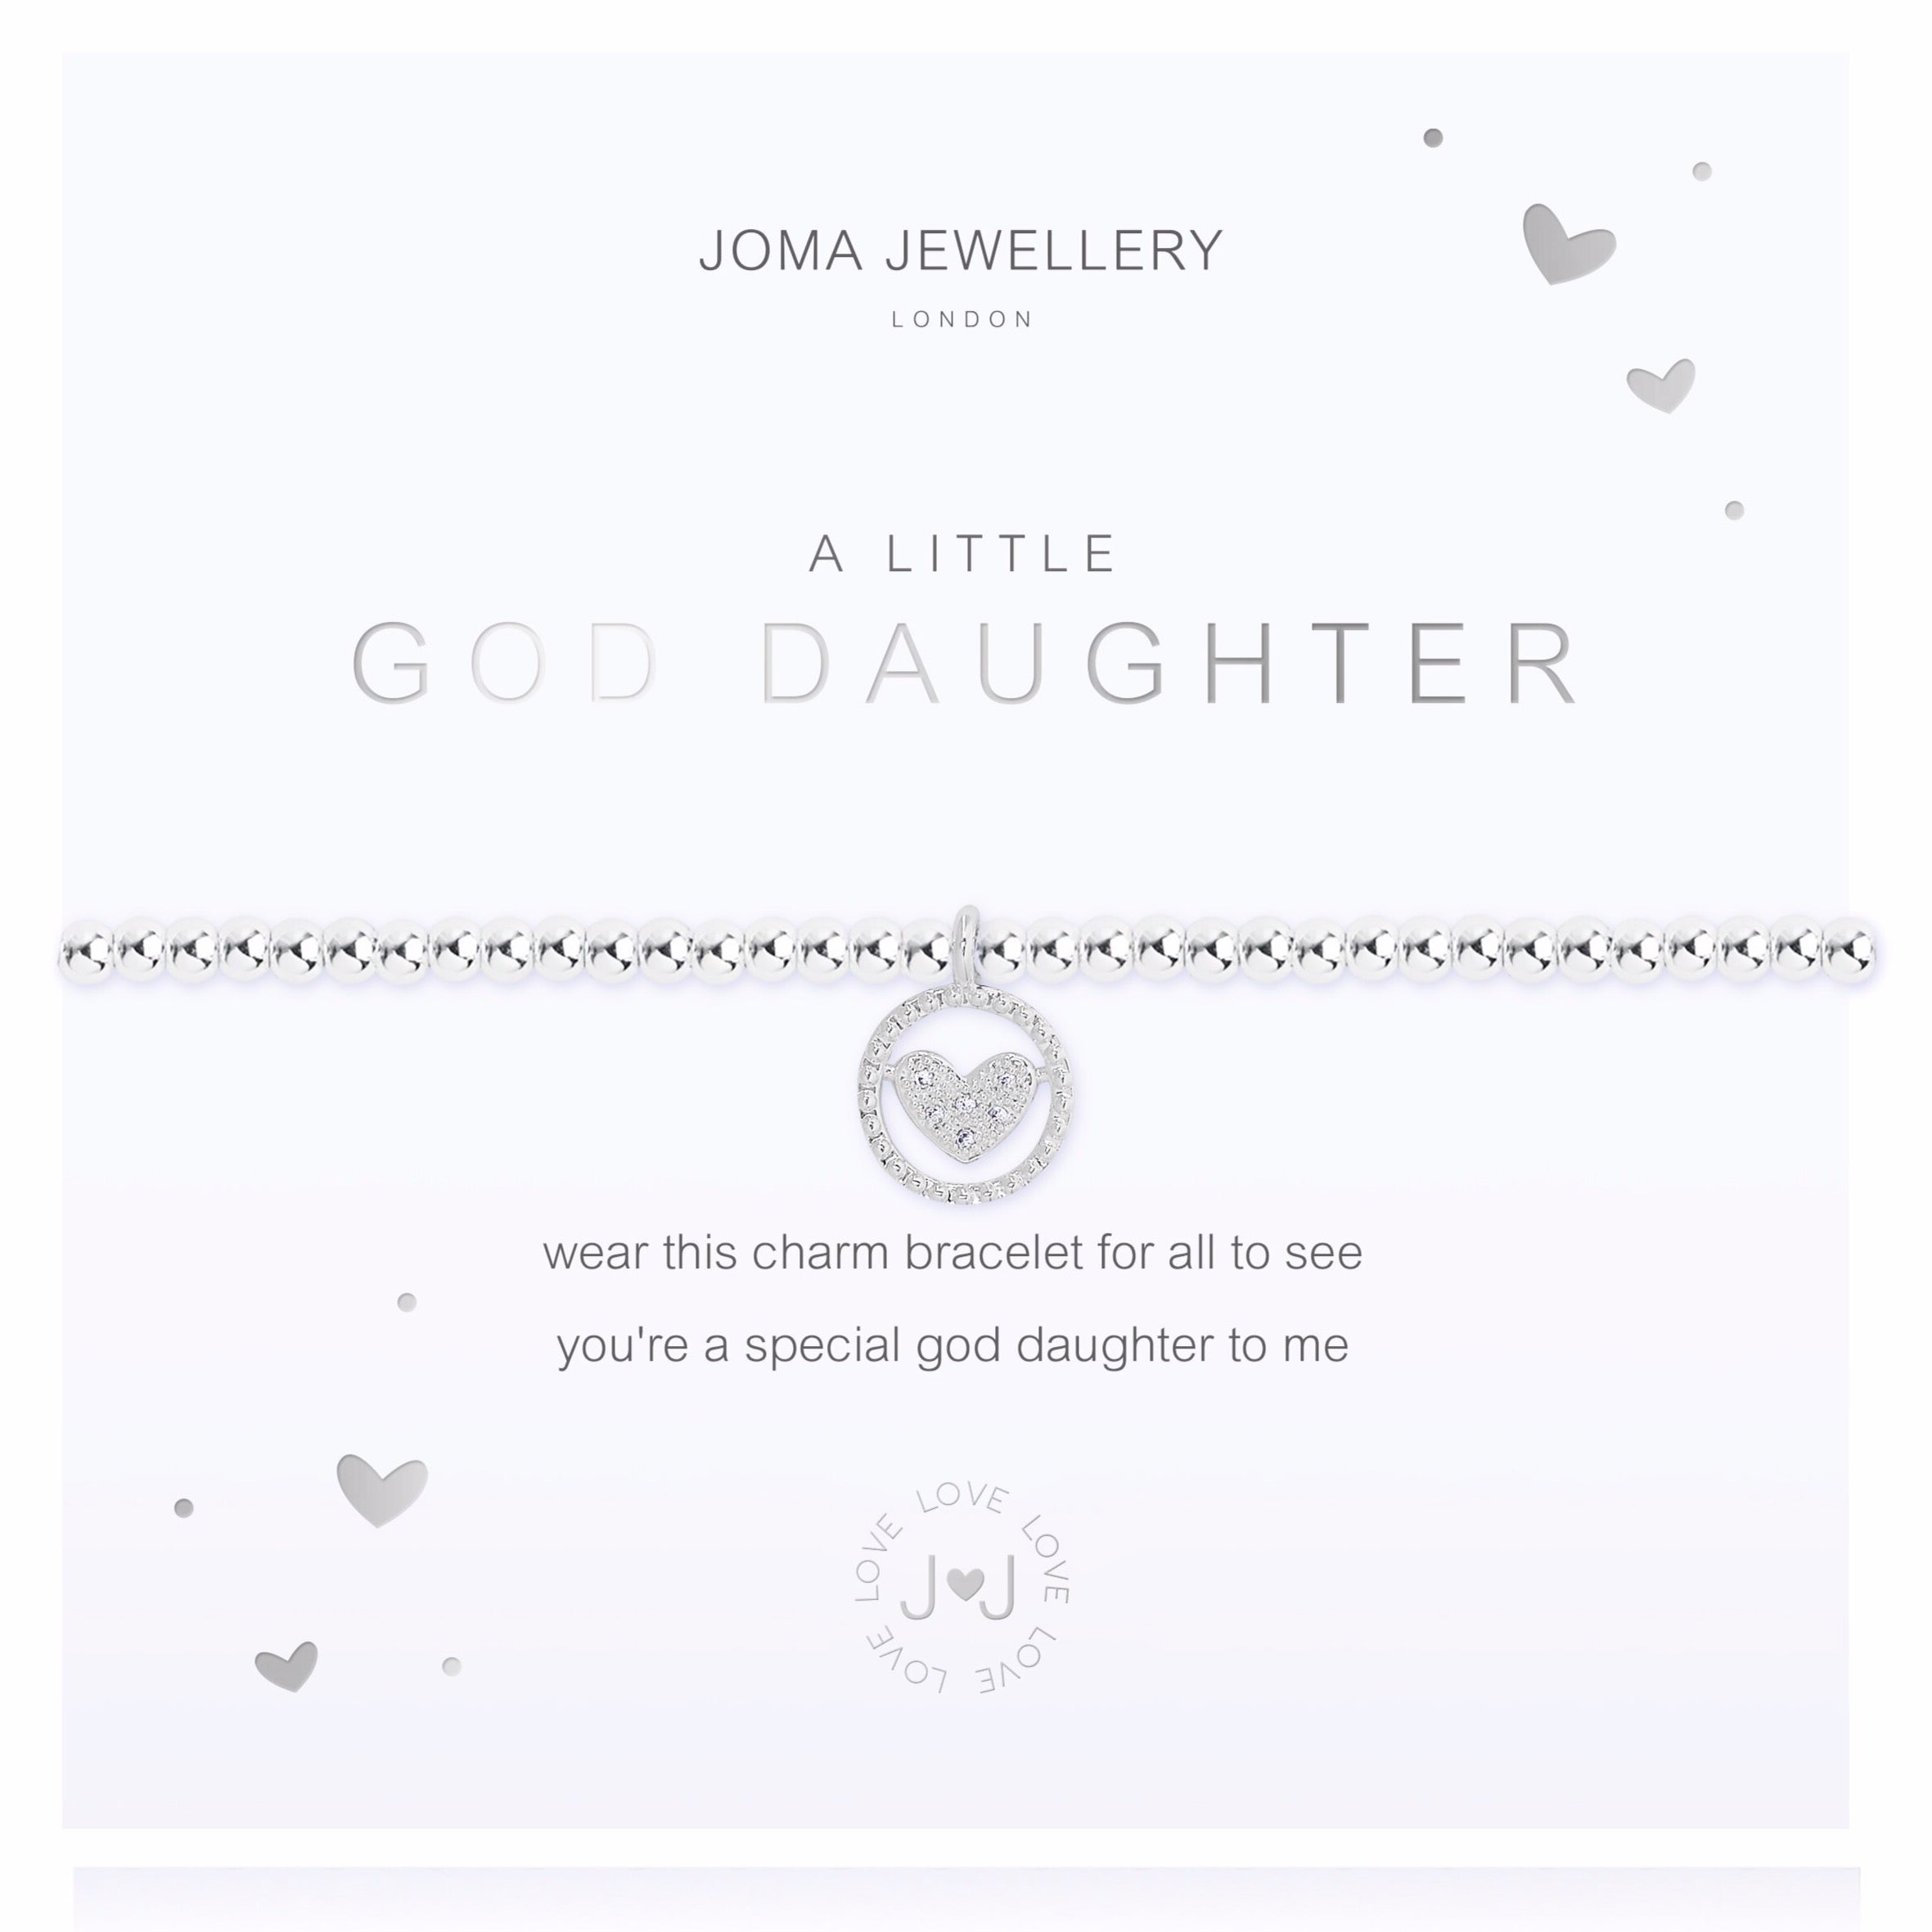 Joma Jewellery A Little God Daughter Bracelet |More Than Just A Gift